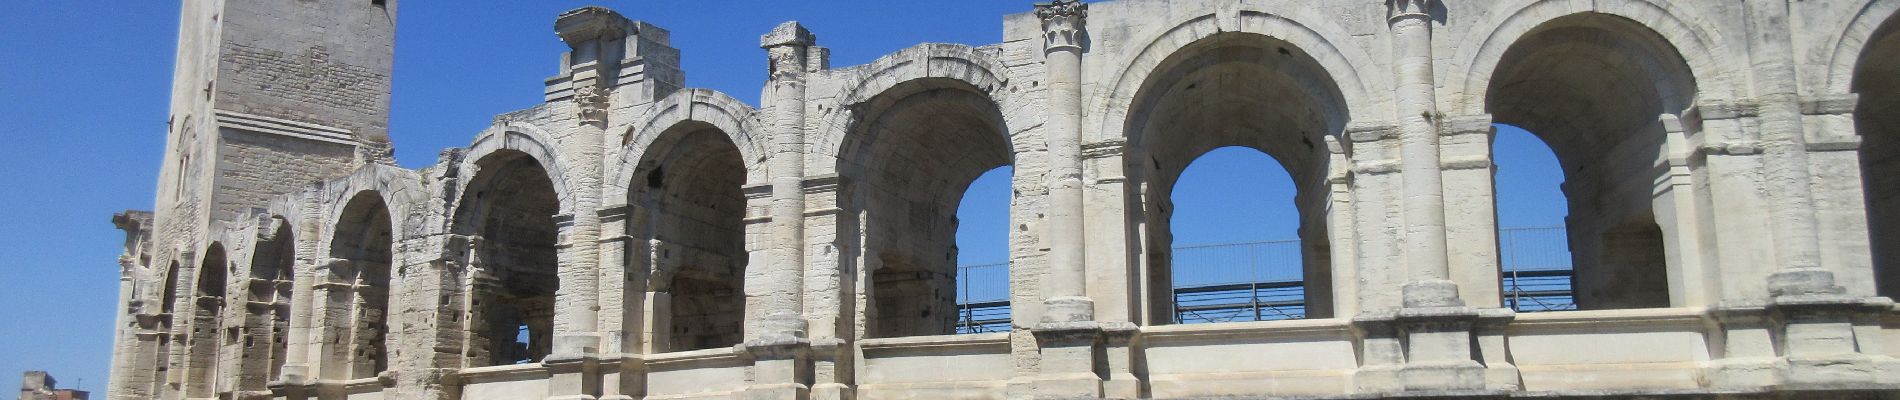 Point of interest Arles - Les Arenes d'Arles - Photo